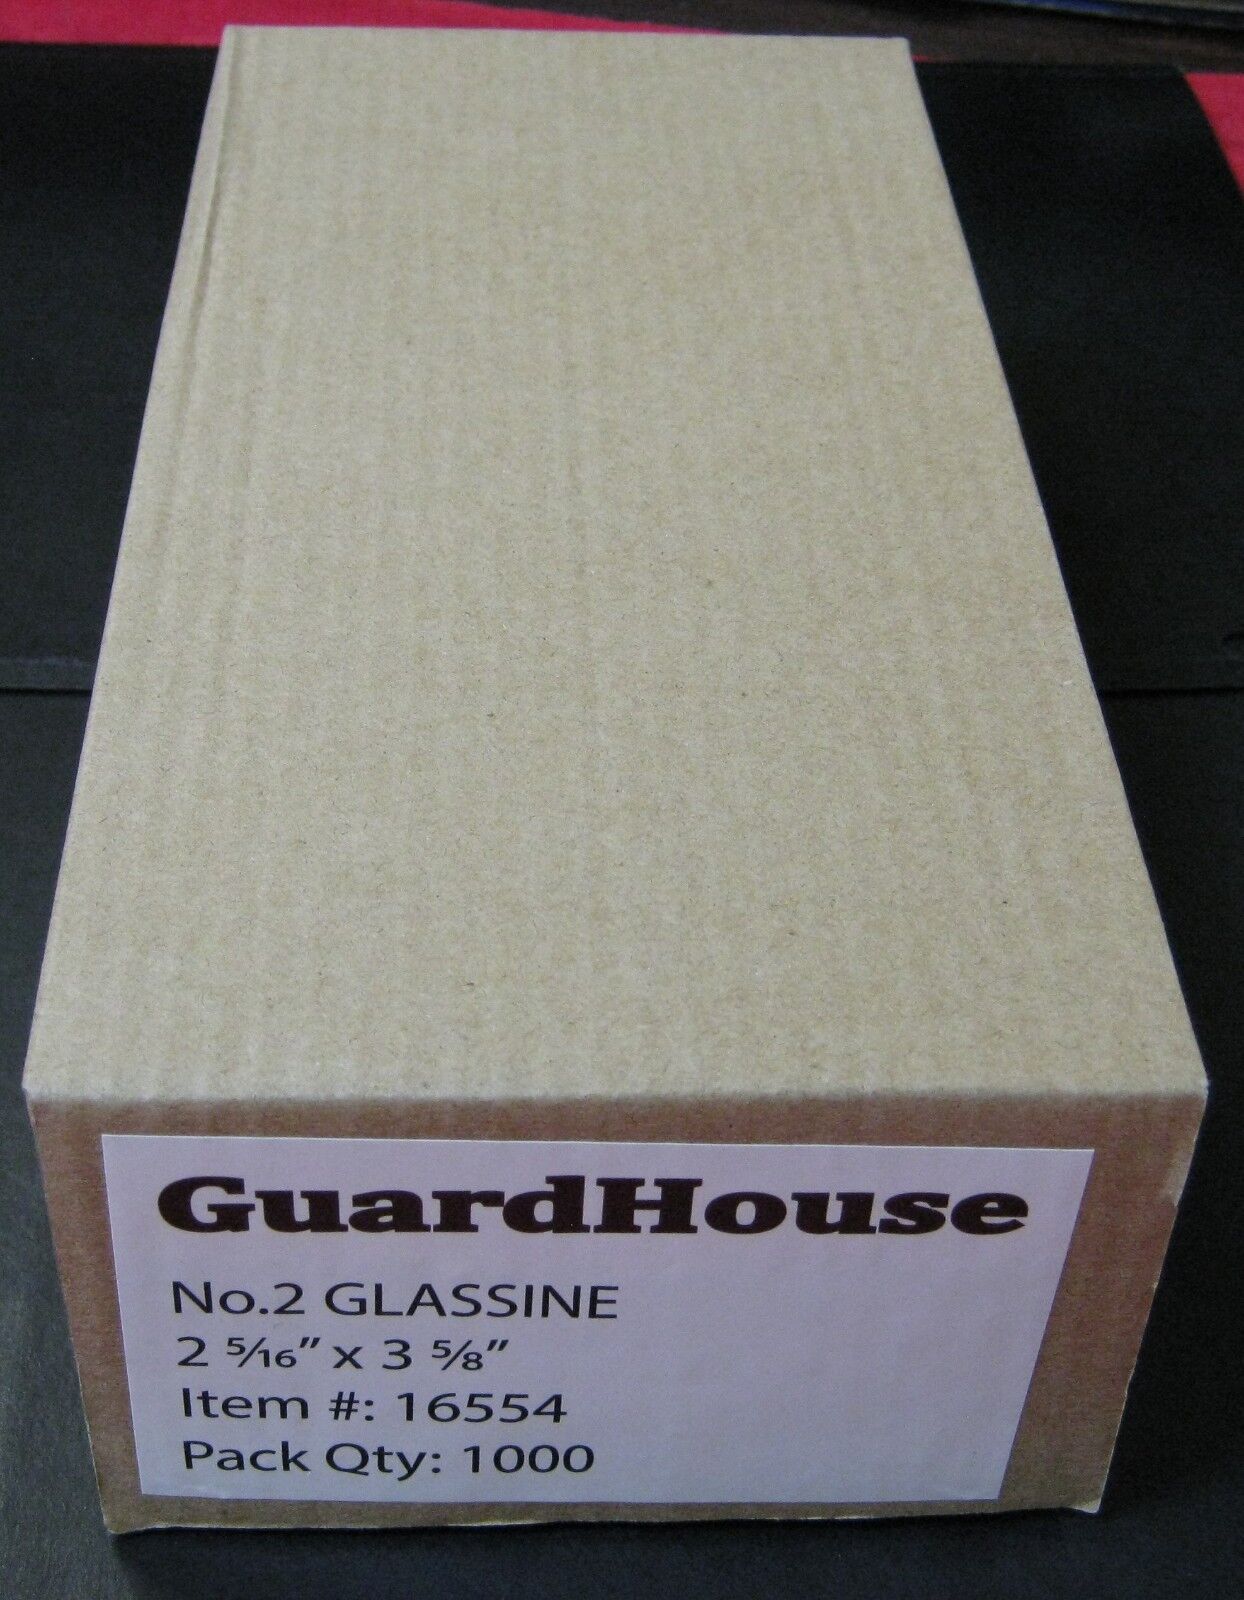 GUARDHOUSE BRAND GLASSINE ENVELOPE SIZE #2. BOX OF 1000 COUNT. 2